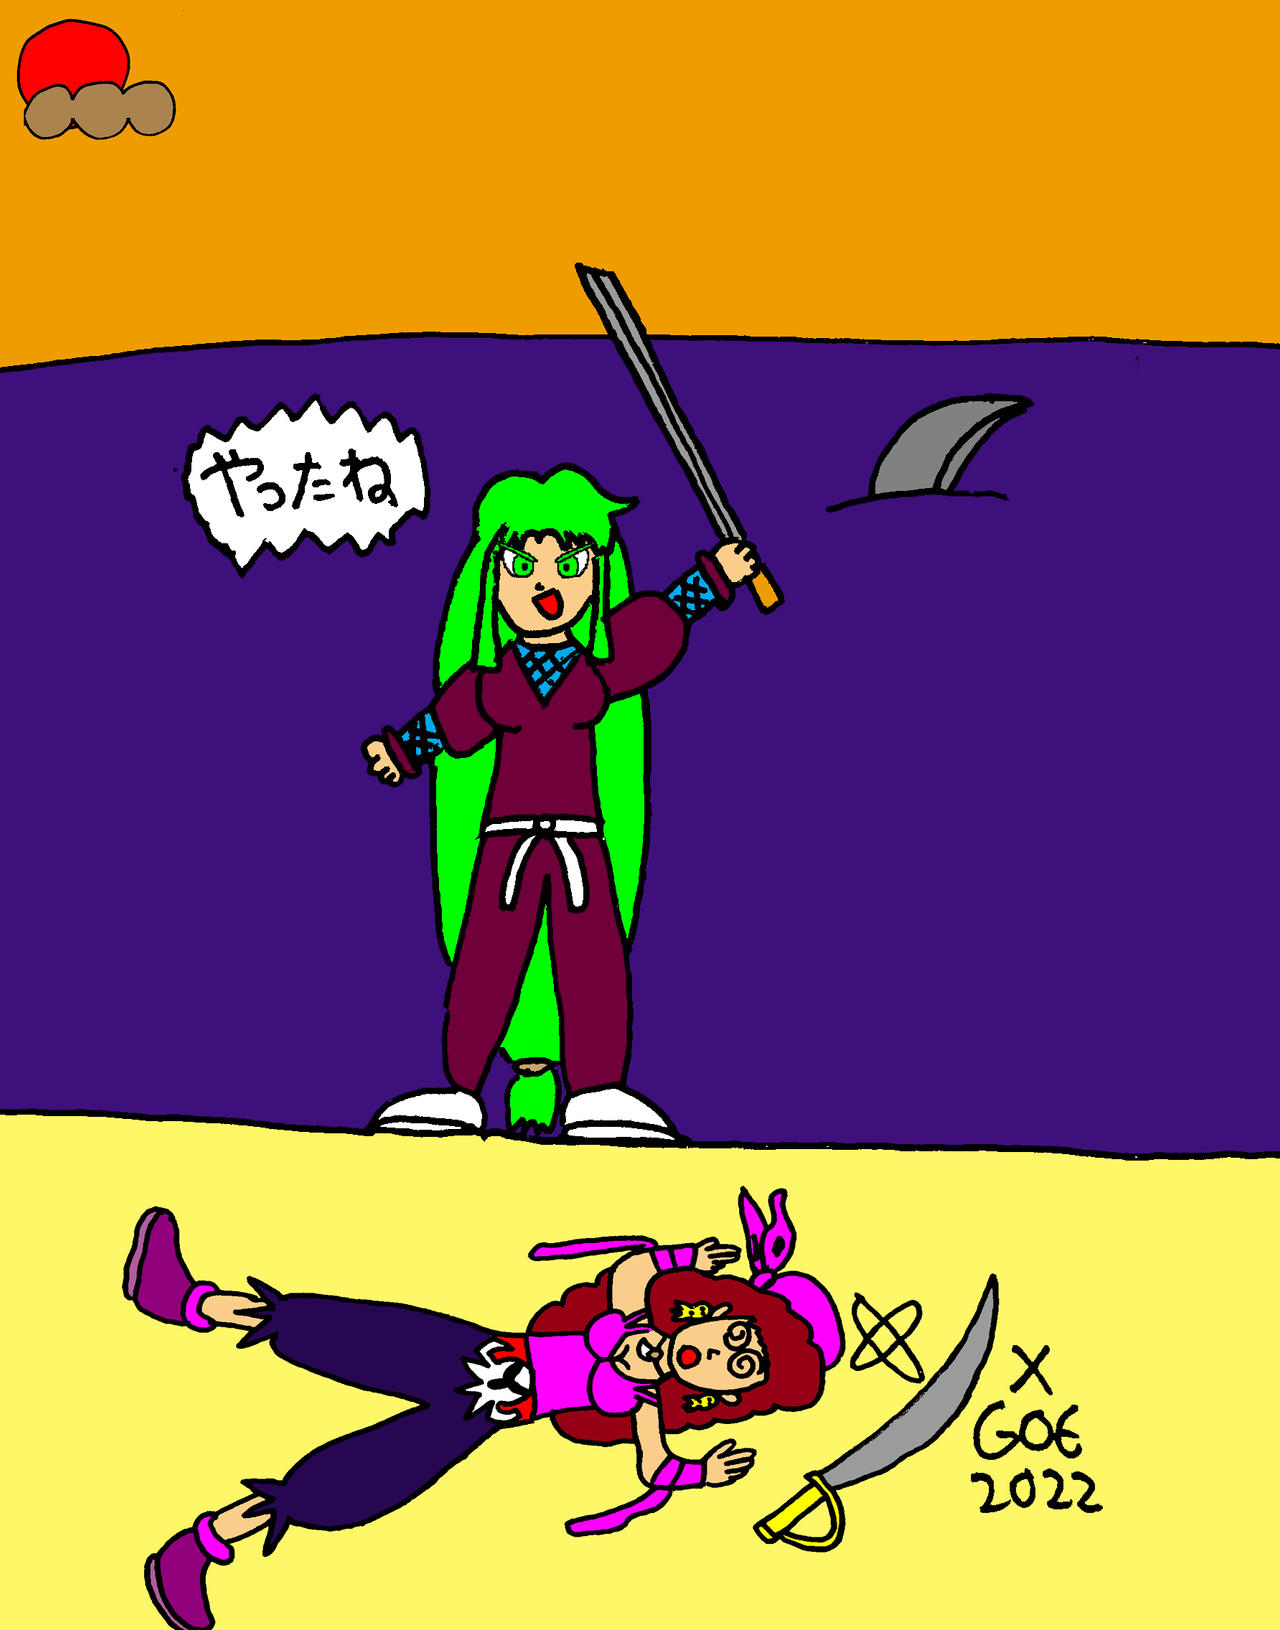 captain_syrup_defeated_by_yae_by_goe_dg9rdwr-fullview.jpg